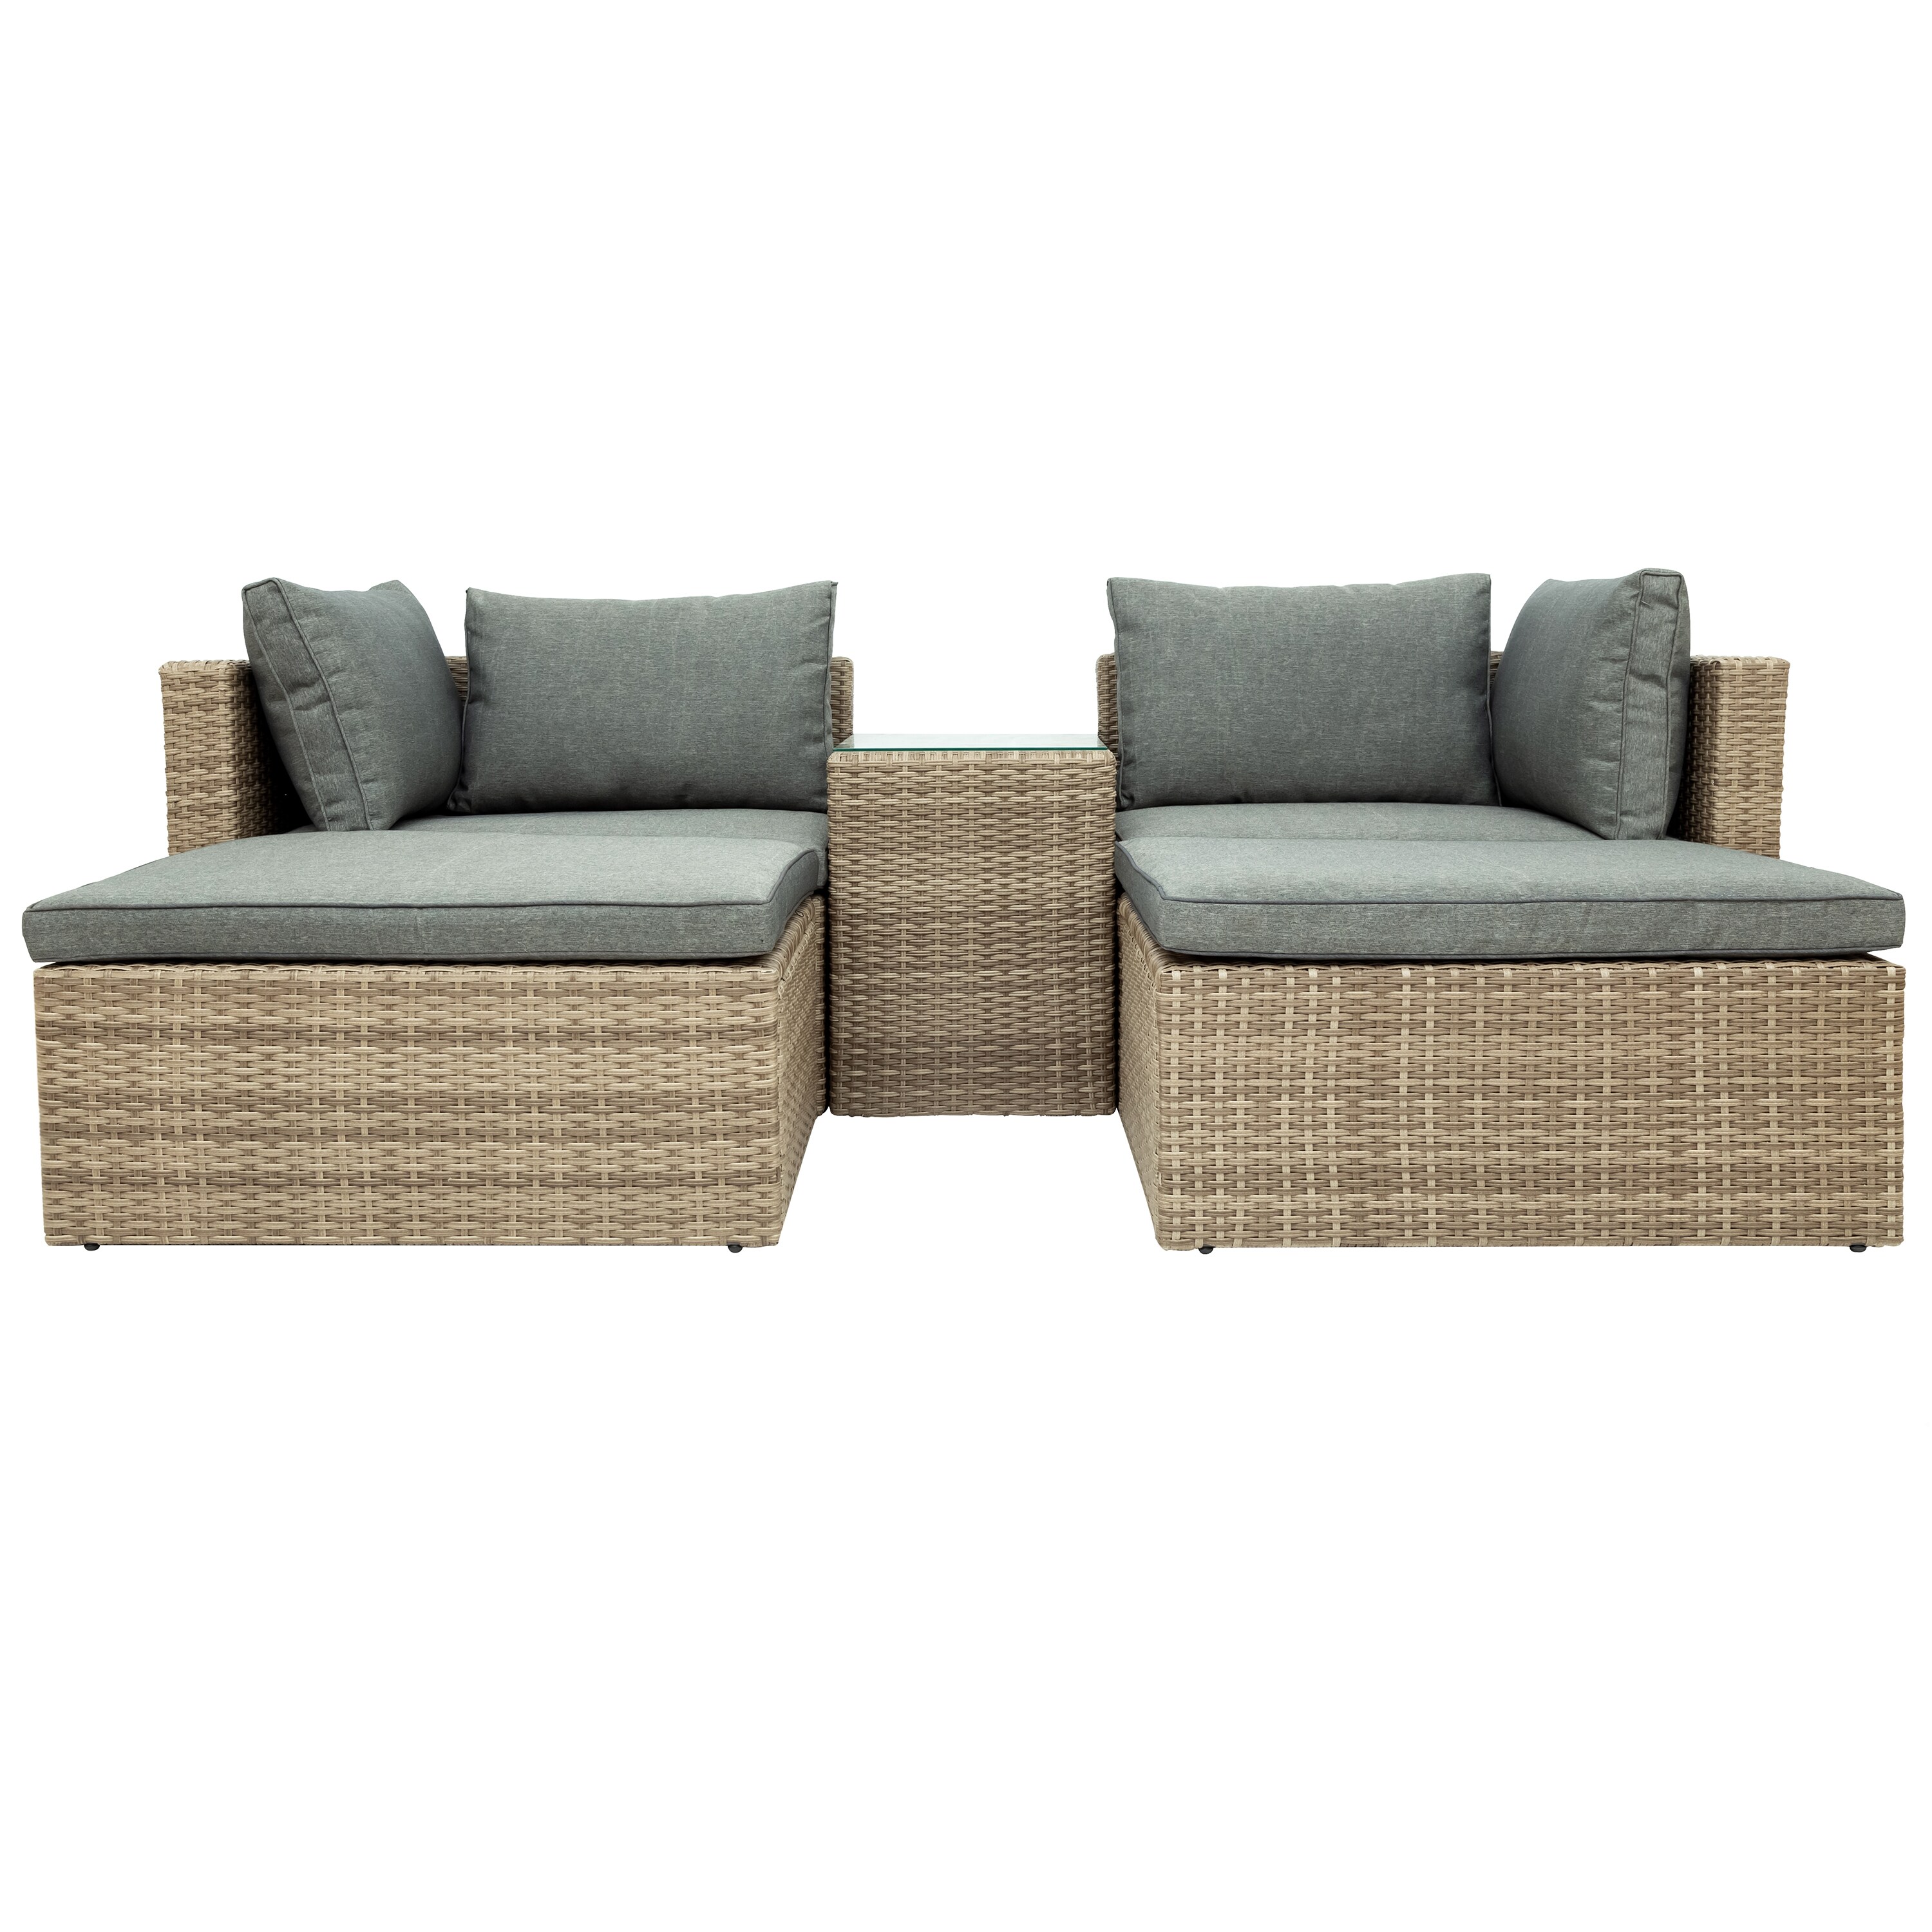 CASAINC sectional set Metal Frame Patio Conversation Set with Cushions in the Patio Conversation Sets department at Lowes.com